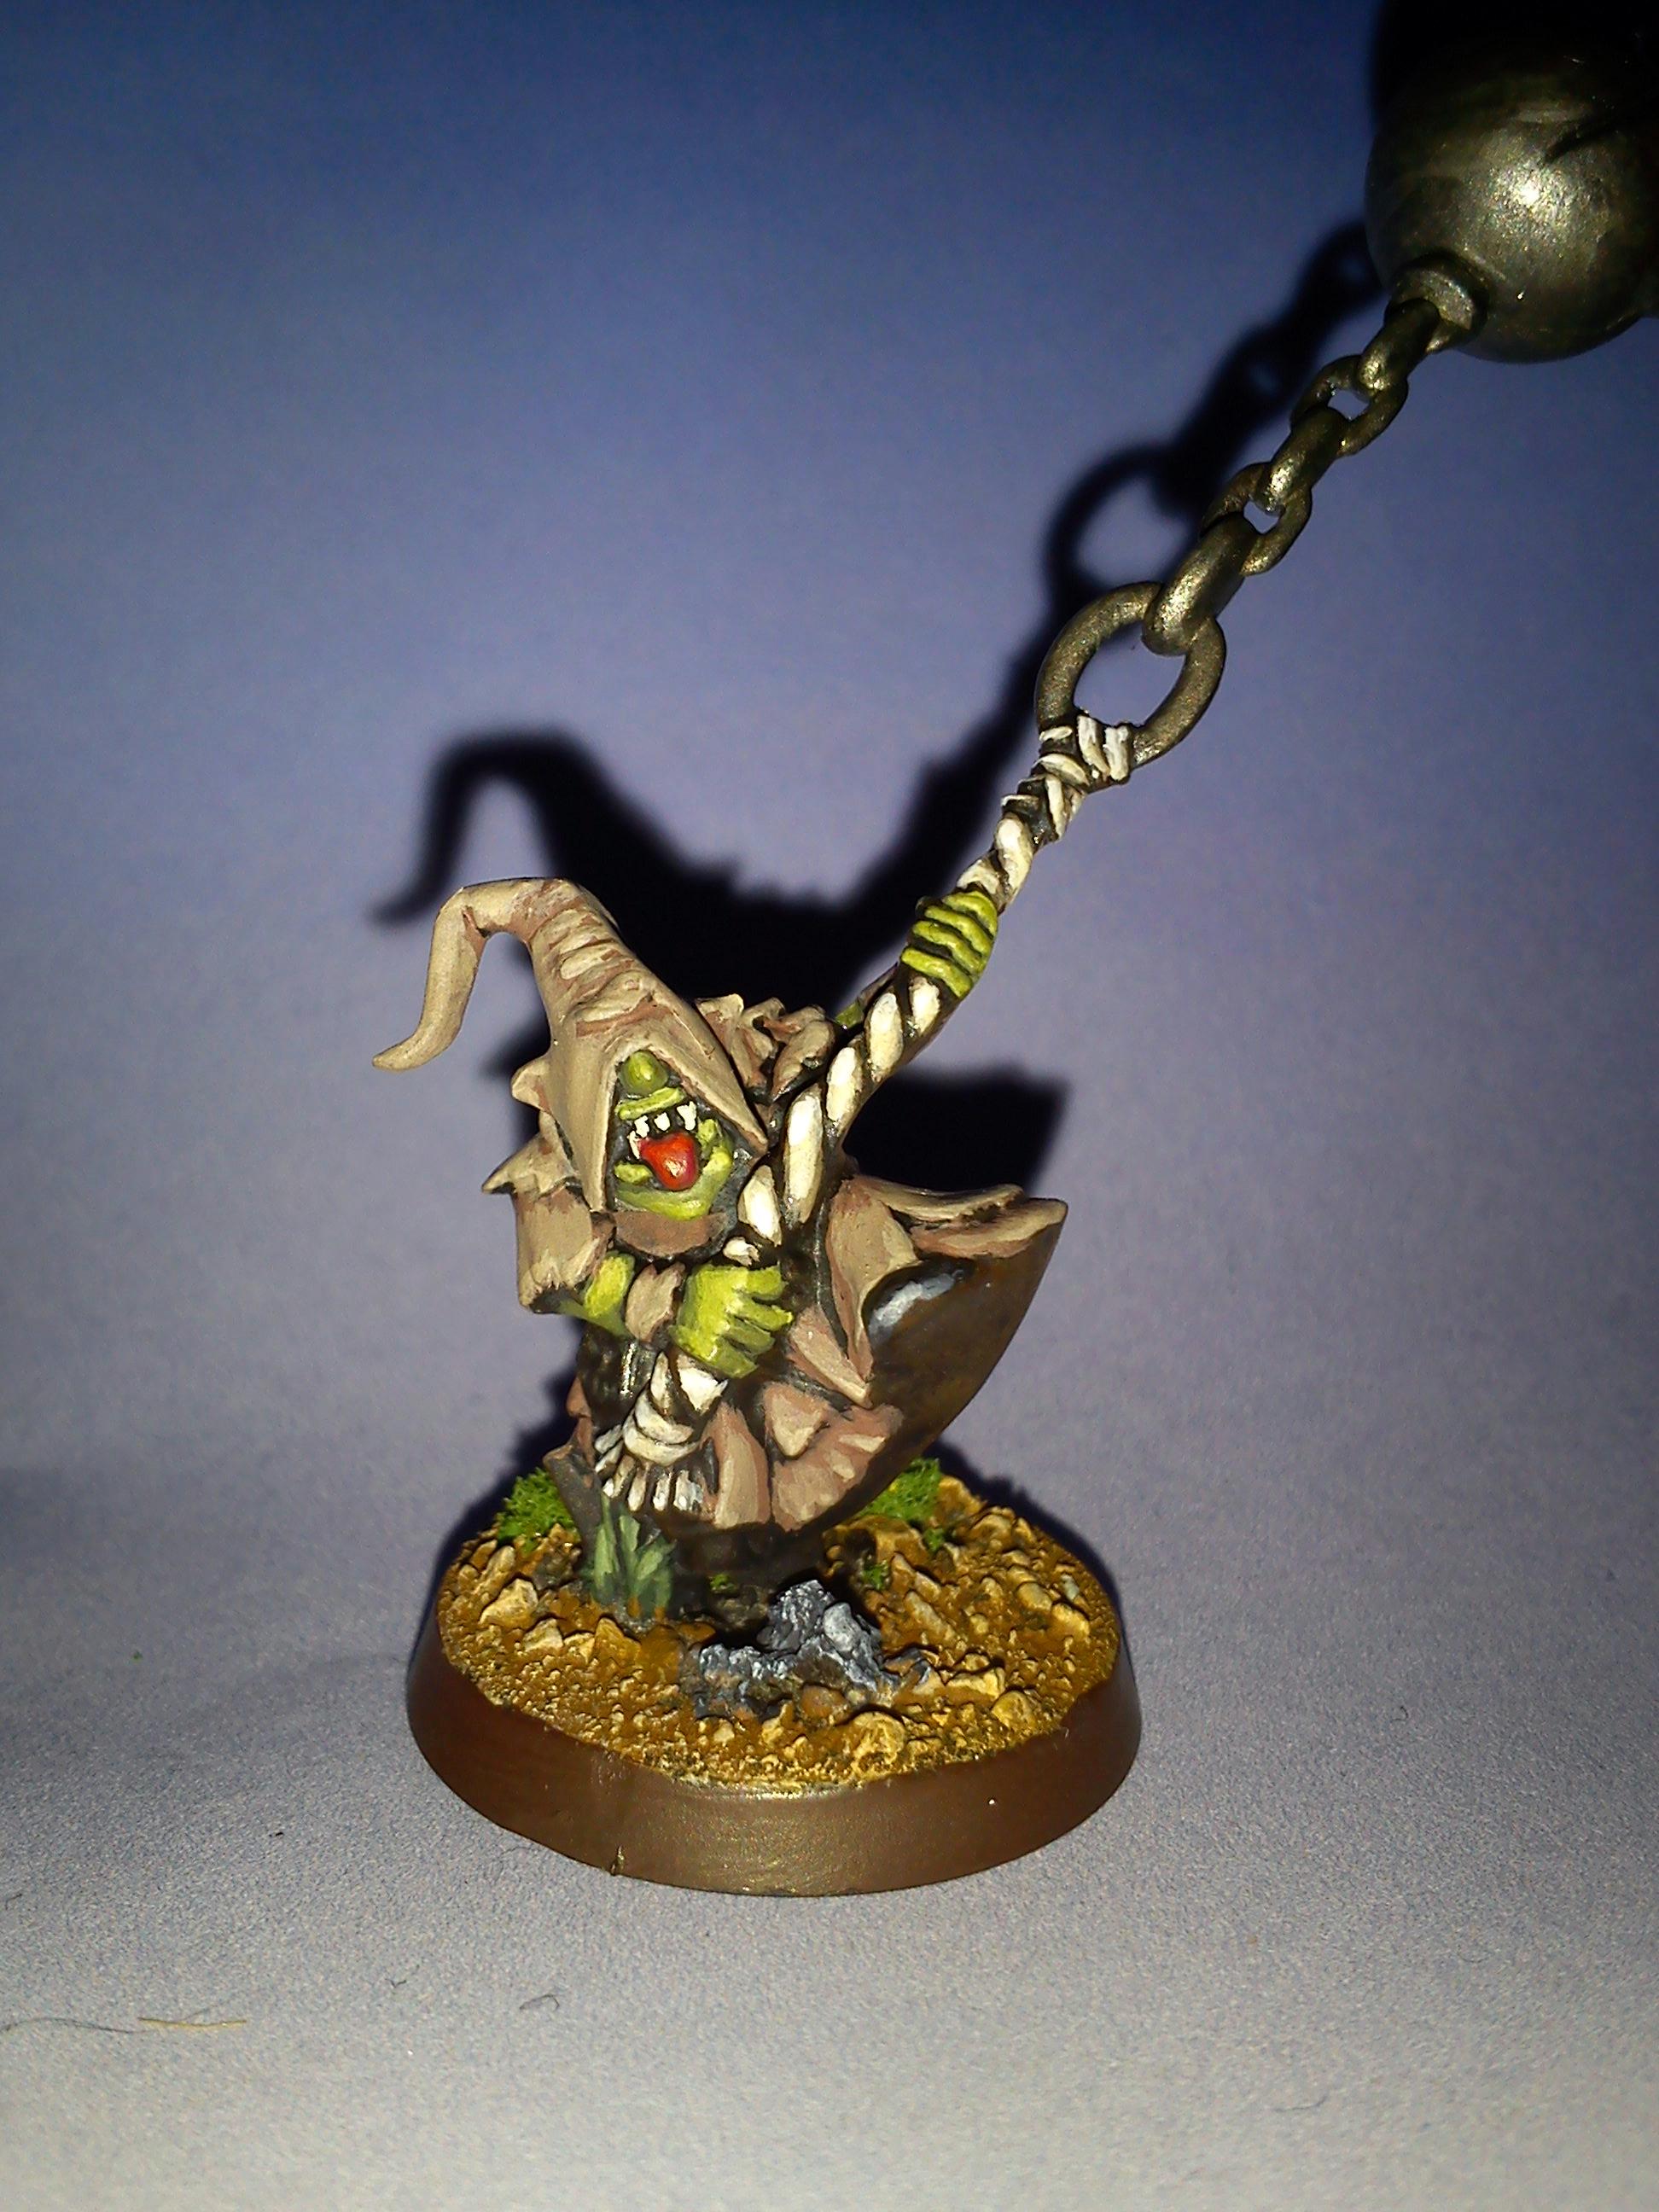 Goblins, First Fanatic